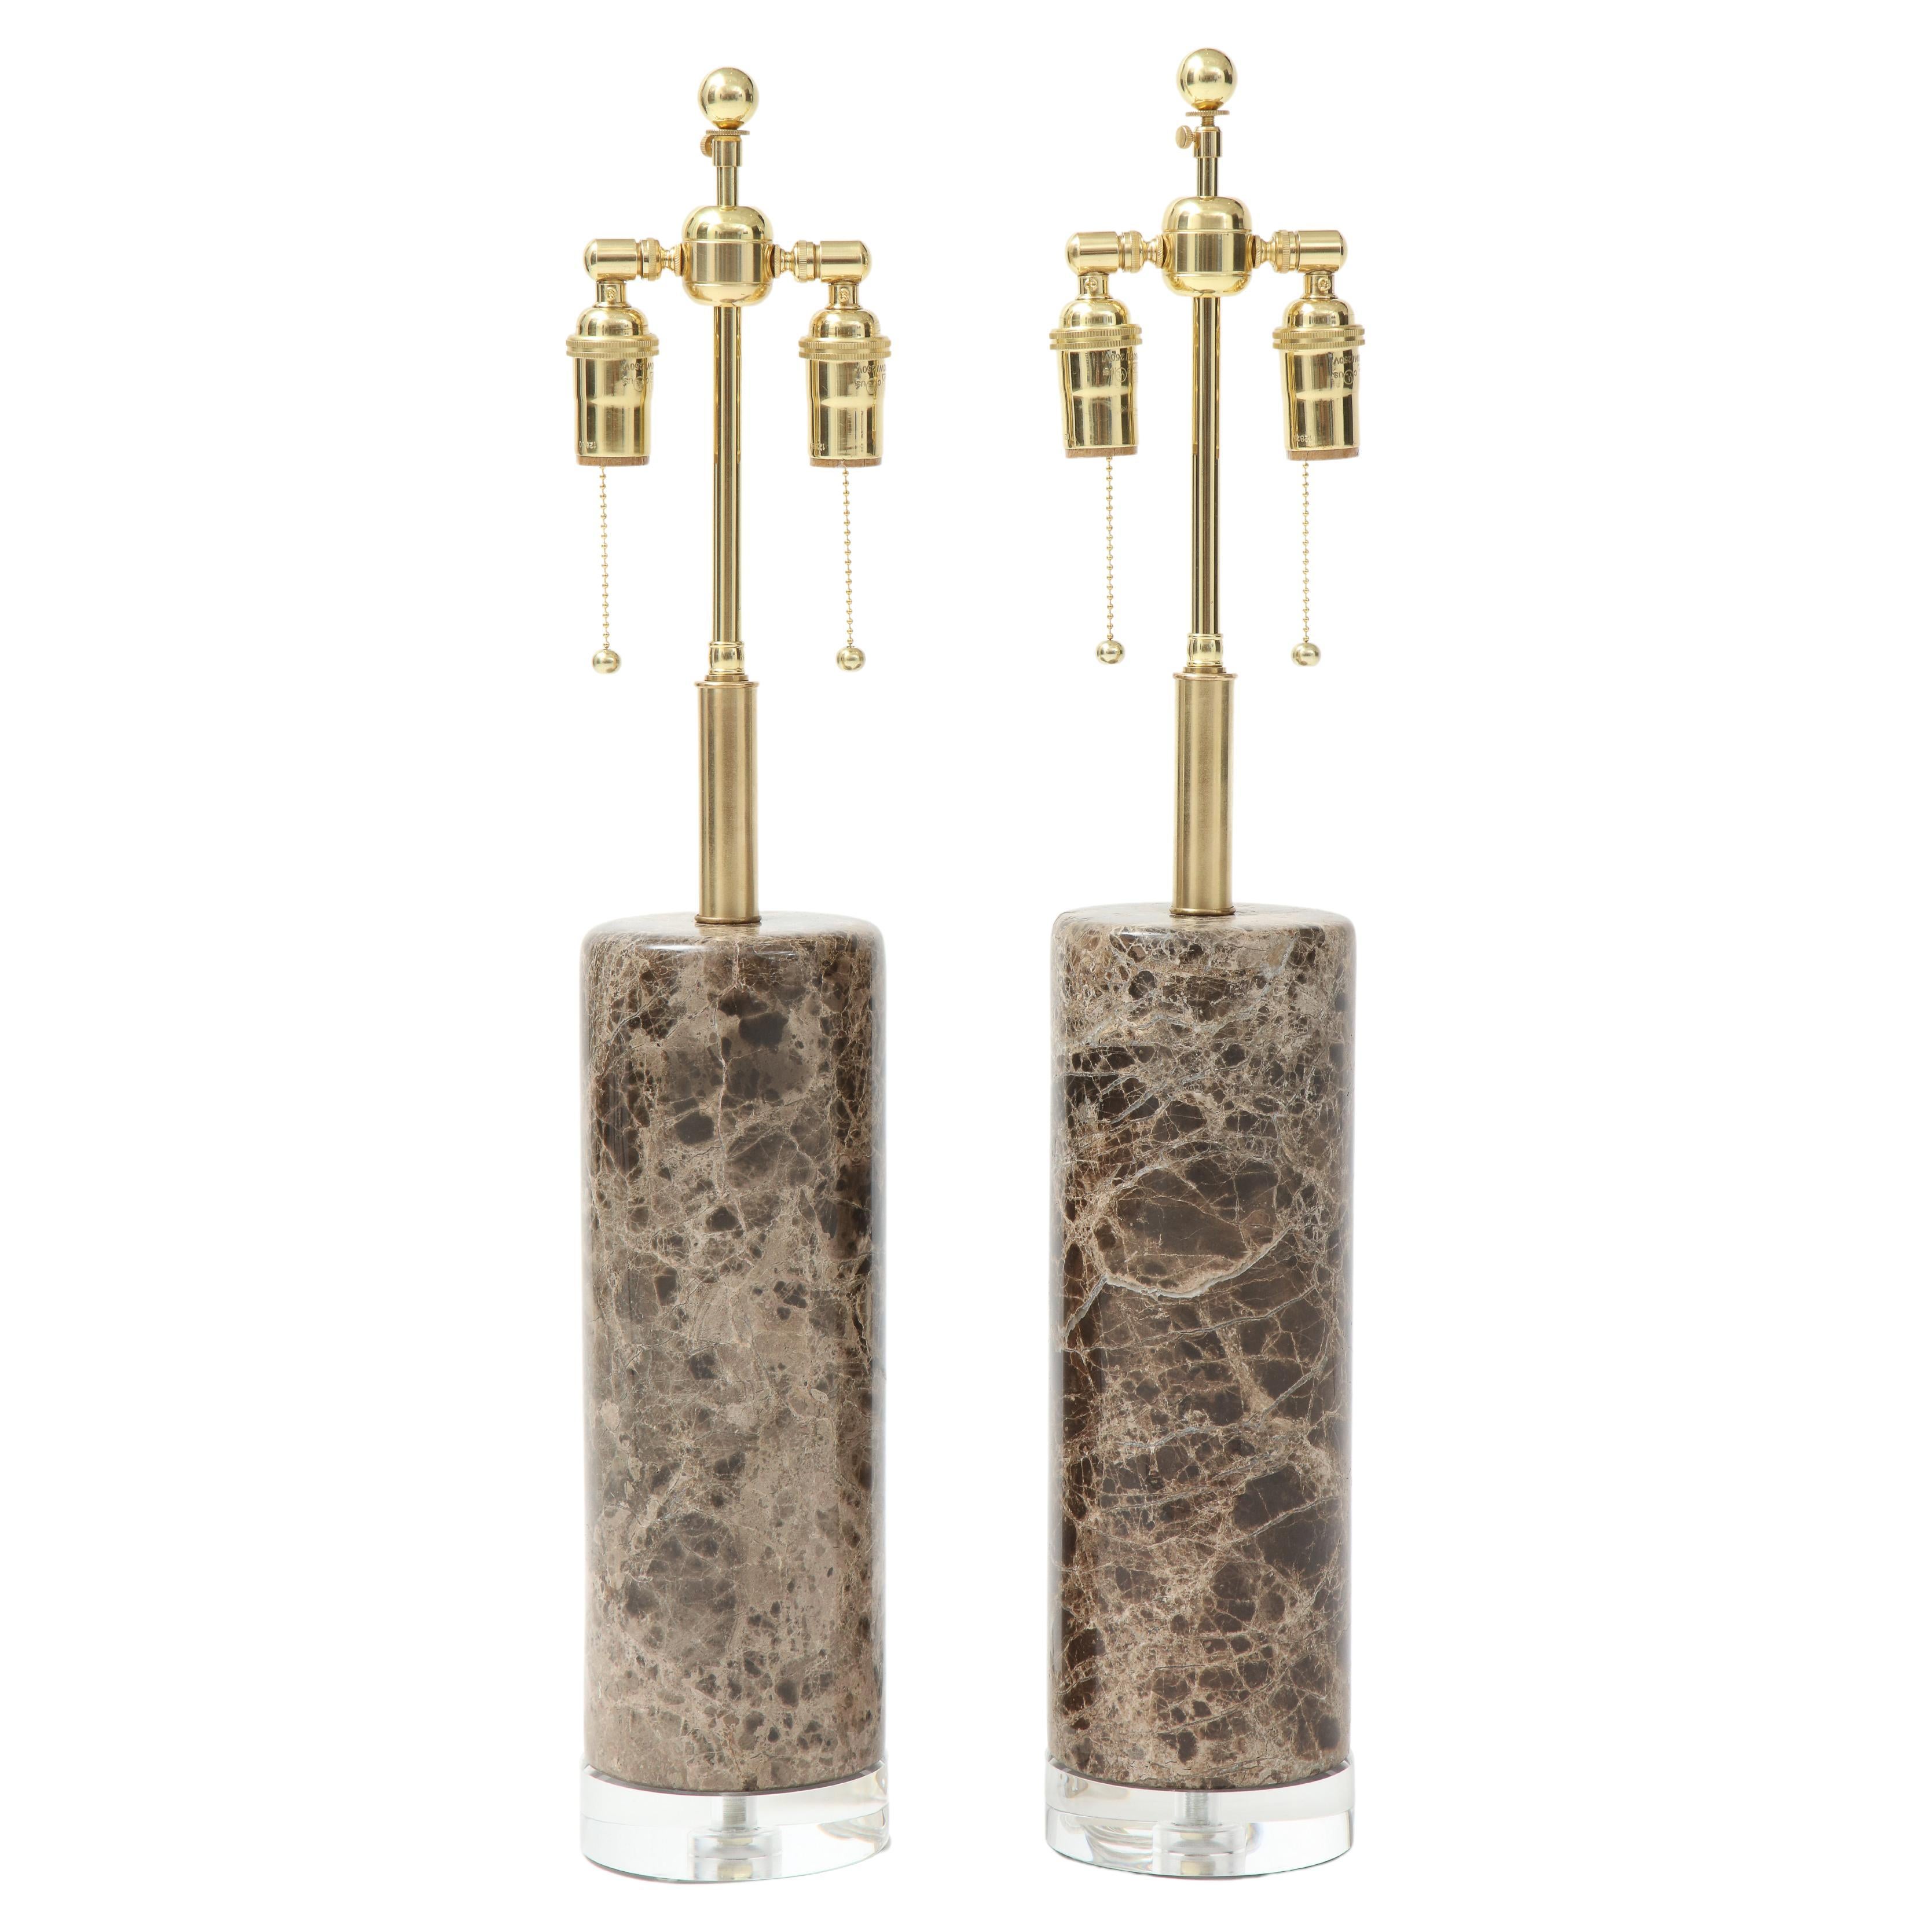 Pair of Marble Lamps on Lucite Bases